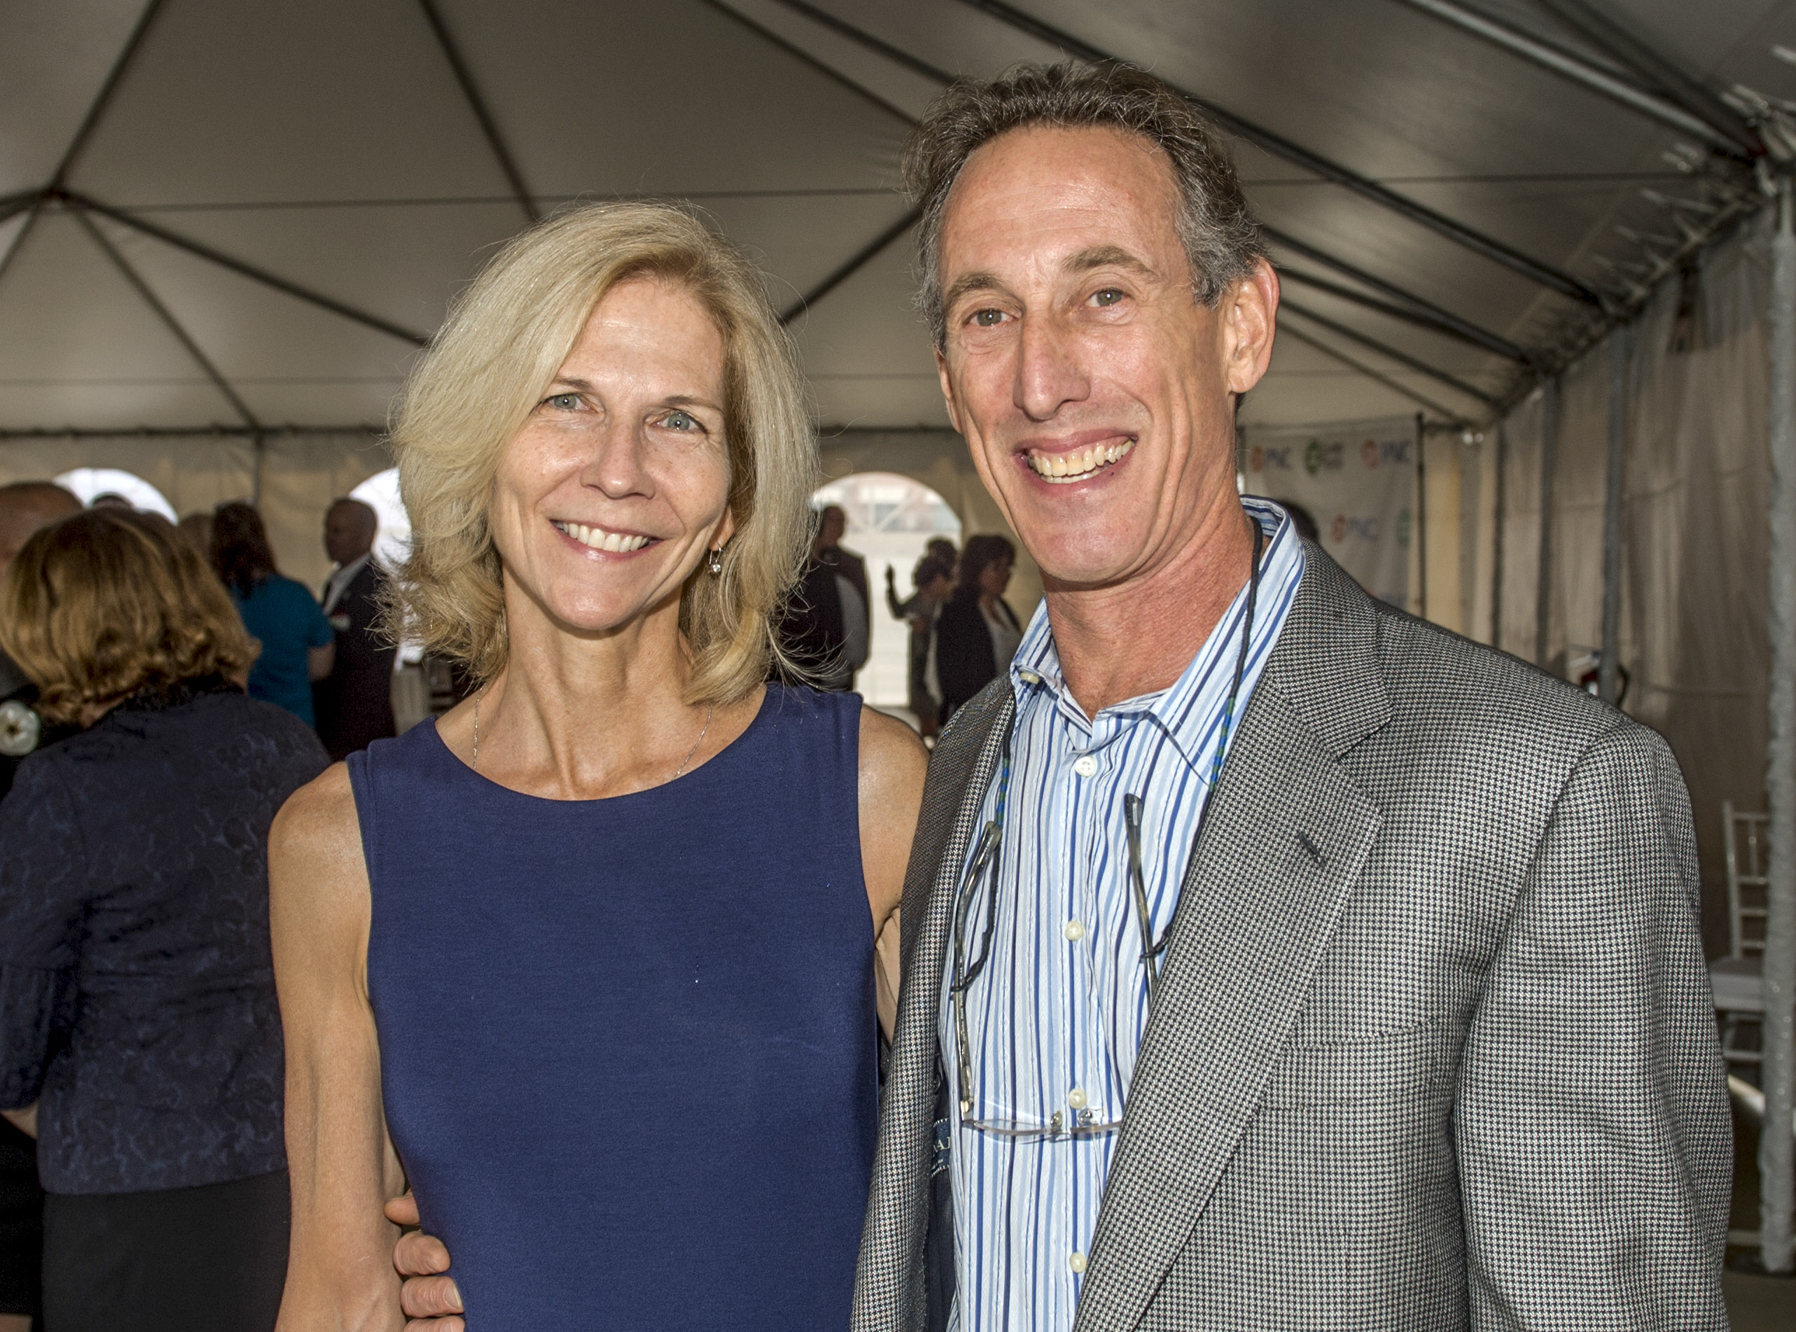 Larry Eger and his wife, Susan Burns, are just two of the slew of movers and shakers who have called the downtown YMCA home.